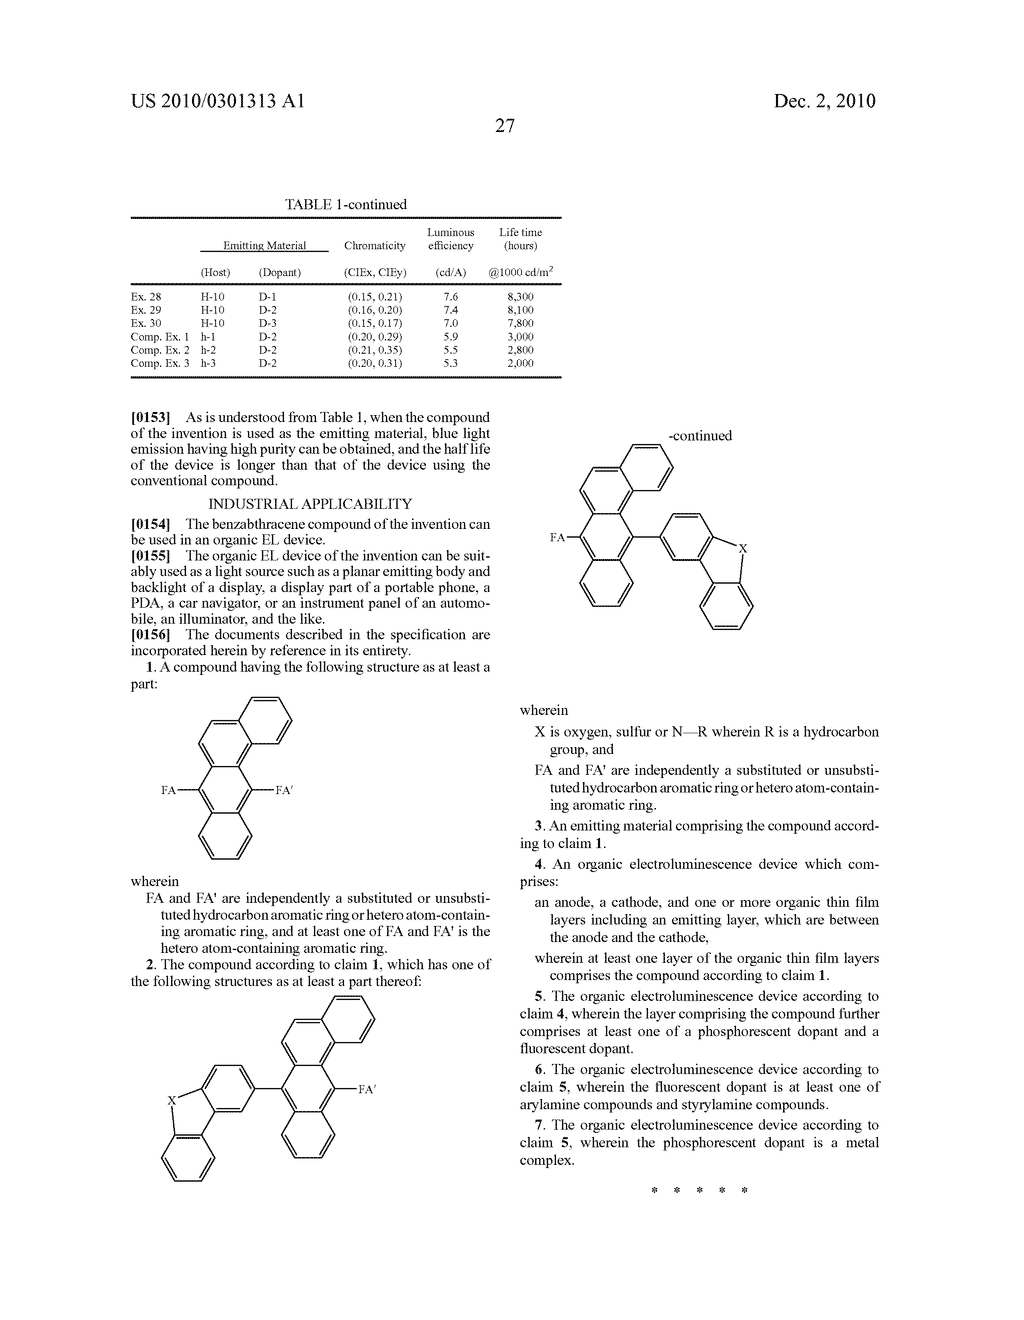 BENZANTHRACENE COMPOUND AND ORGANIC ELECTROLUMINESCENCE DEVICE USING THE SAME - diagram, schematic, and image 29